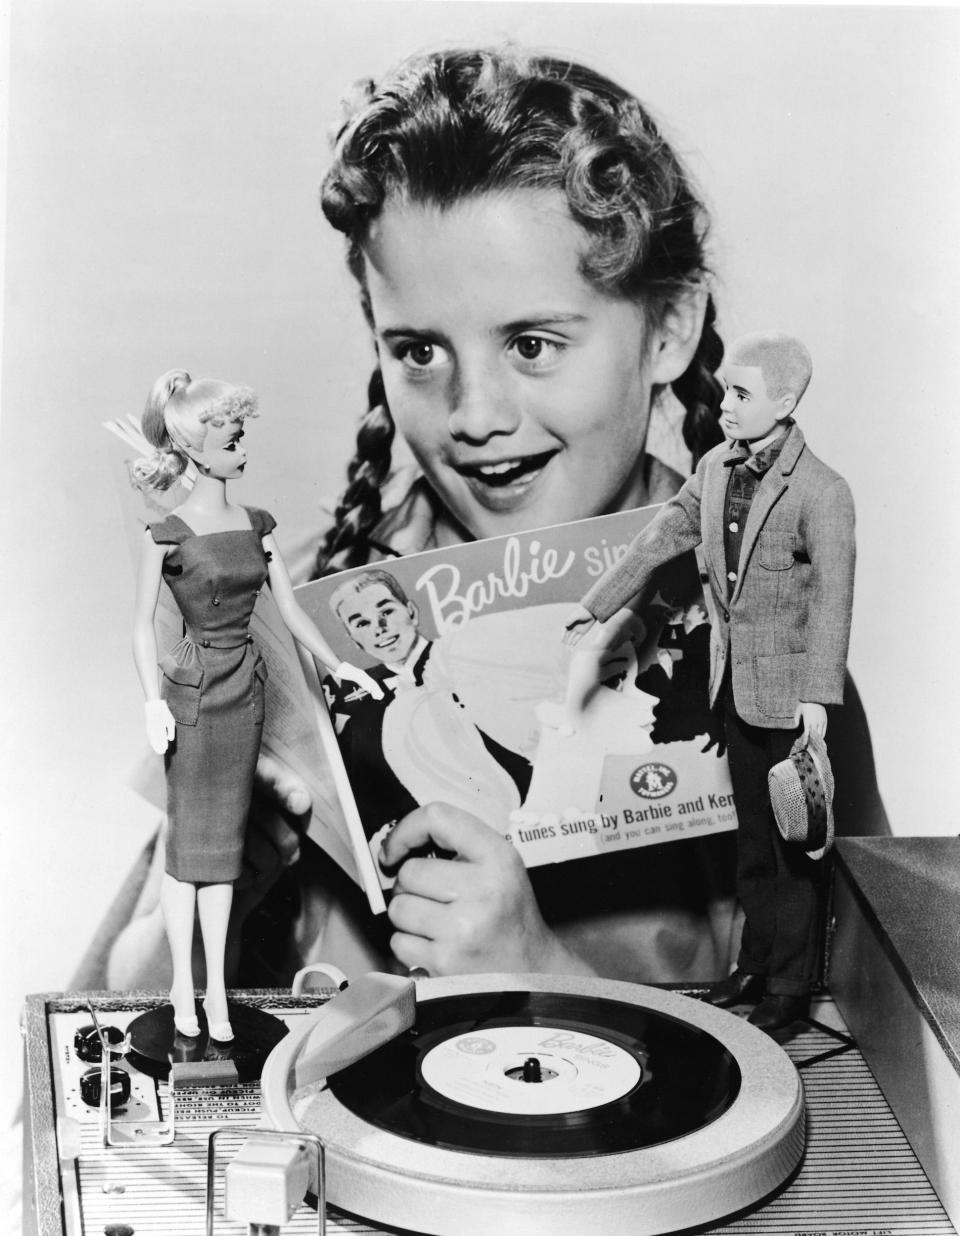 A girl sings beside her Barbie and Ken Doll to a song called “Barbie Sings” in 1961.